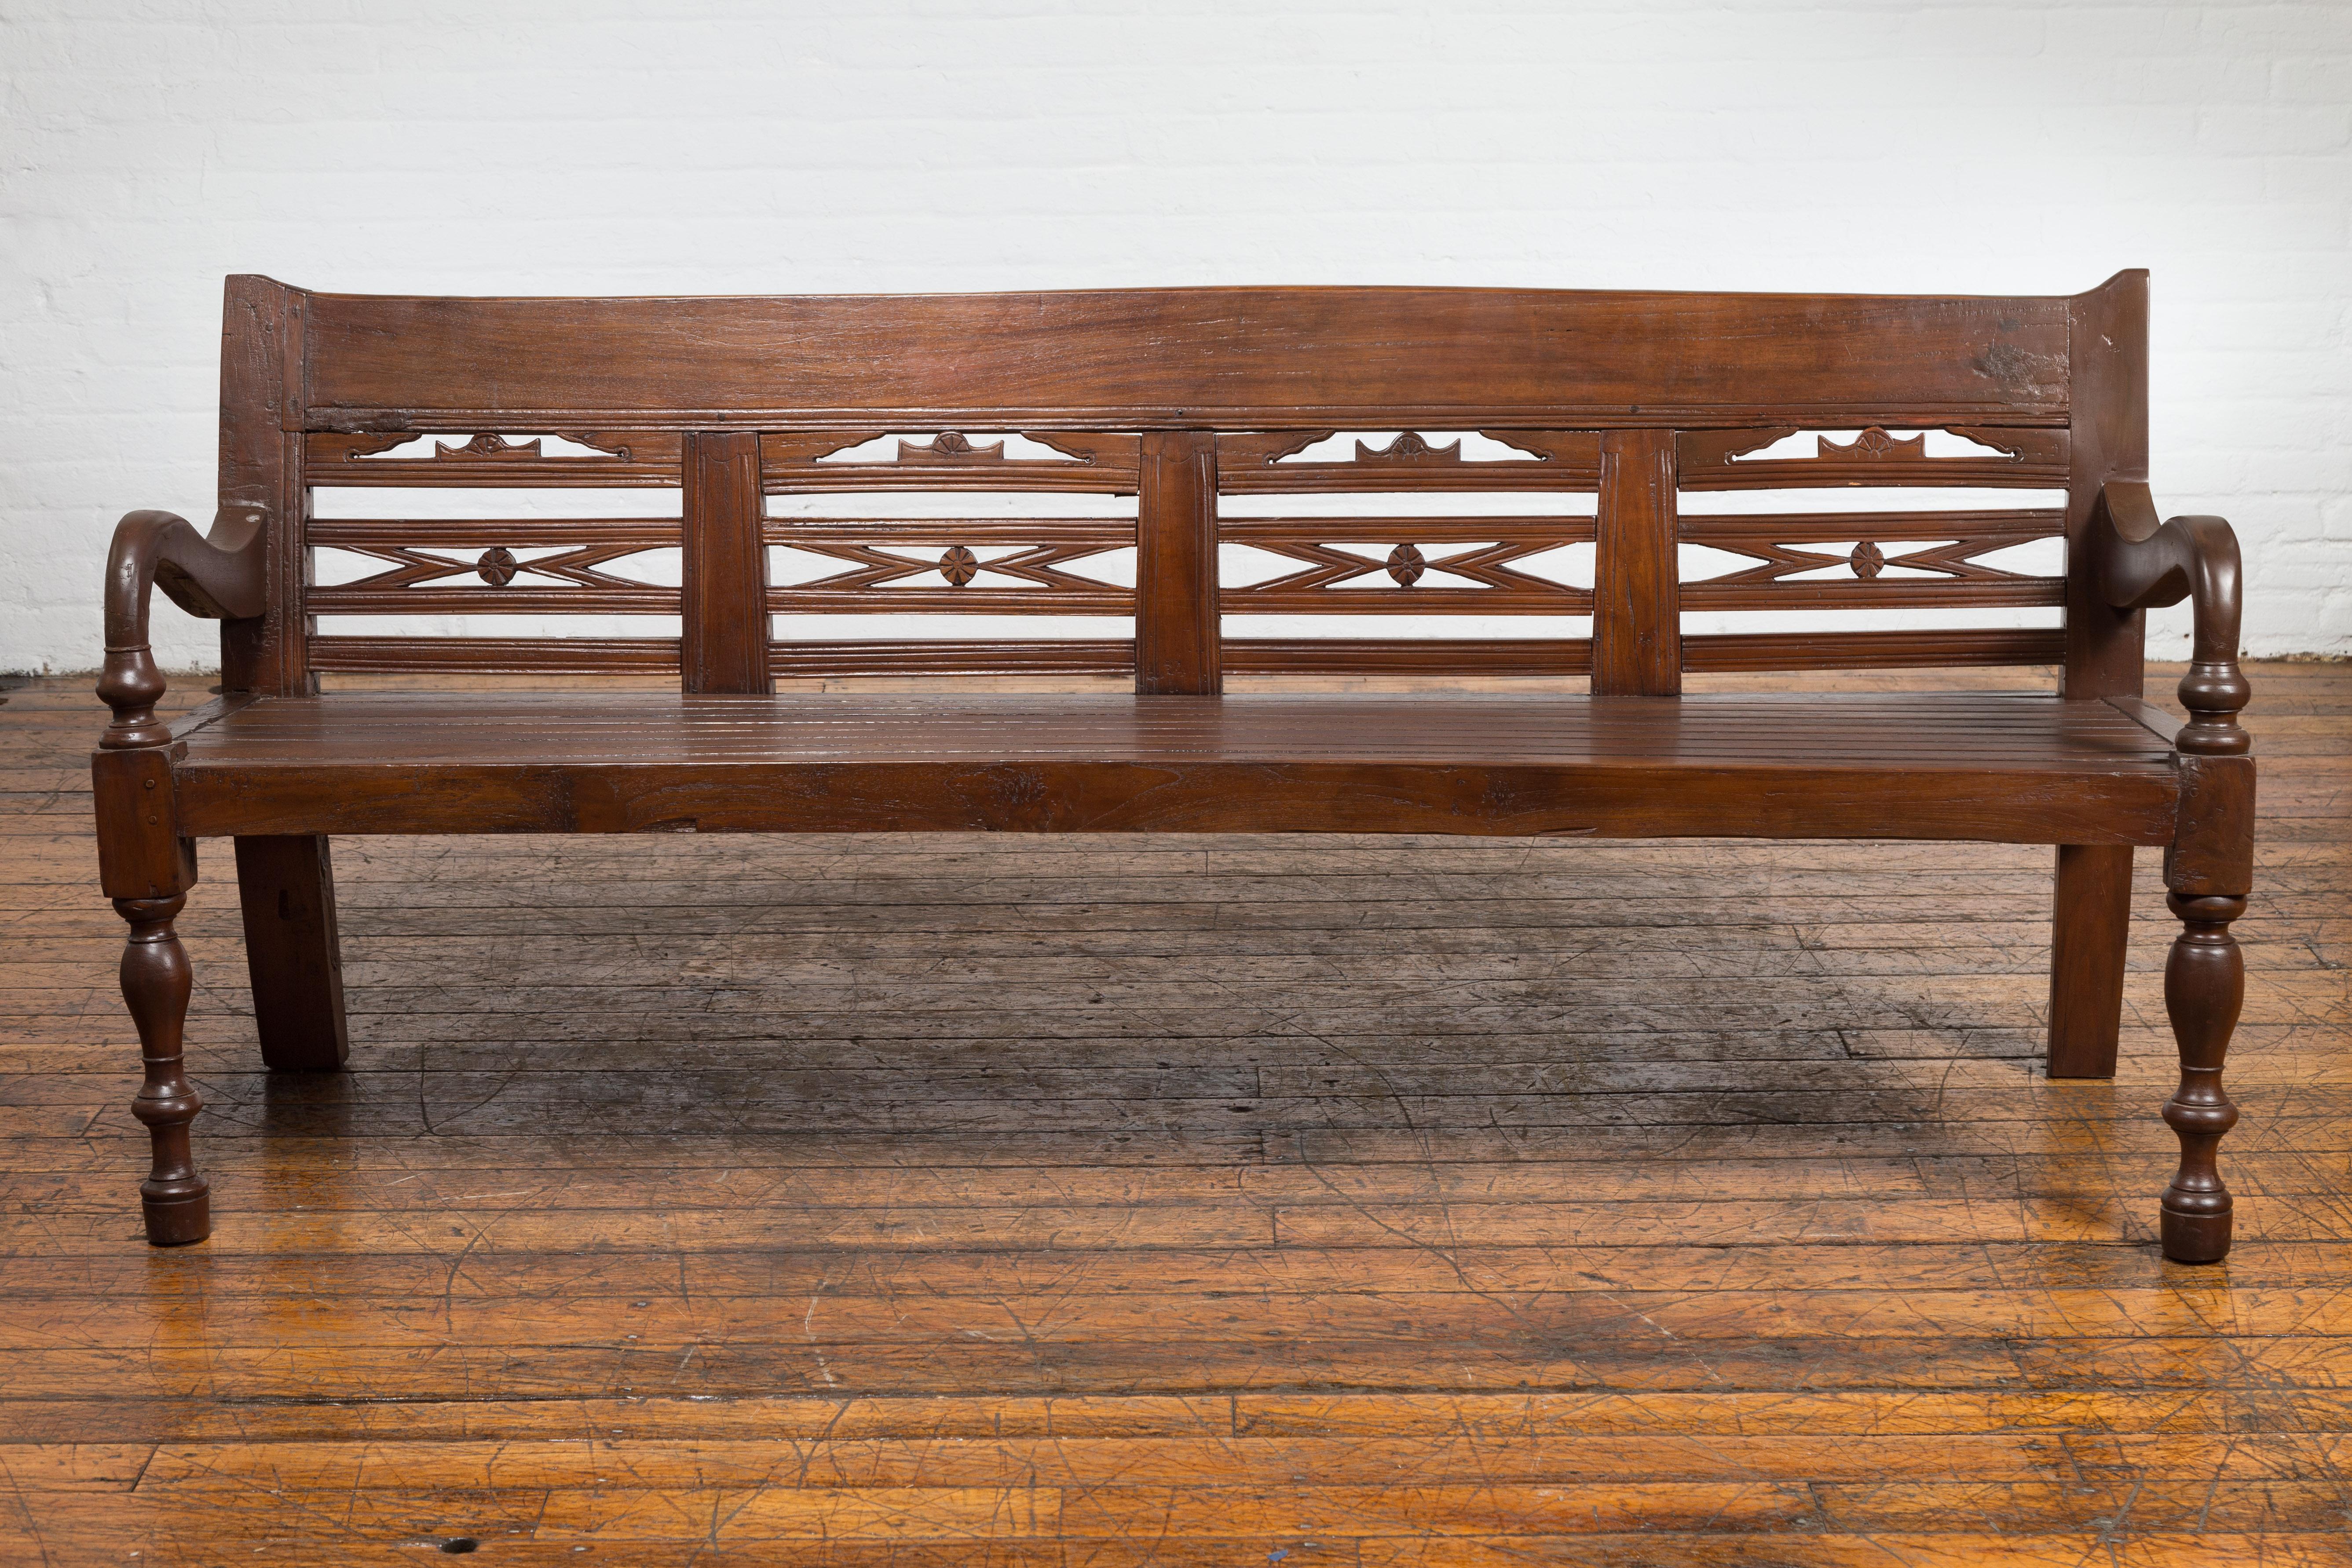 An antique teak wood Javanese settee from circa 1900 with hand-carved back, scrolling arms and baluster legs. This antique Javanese settee, dating back to circa 1900, is a striking piece of furniture crafted from teak wood, renowned for its